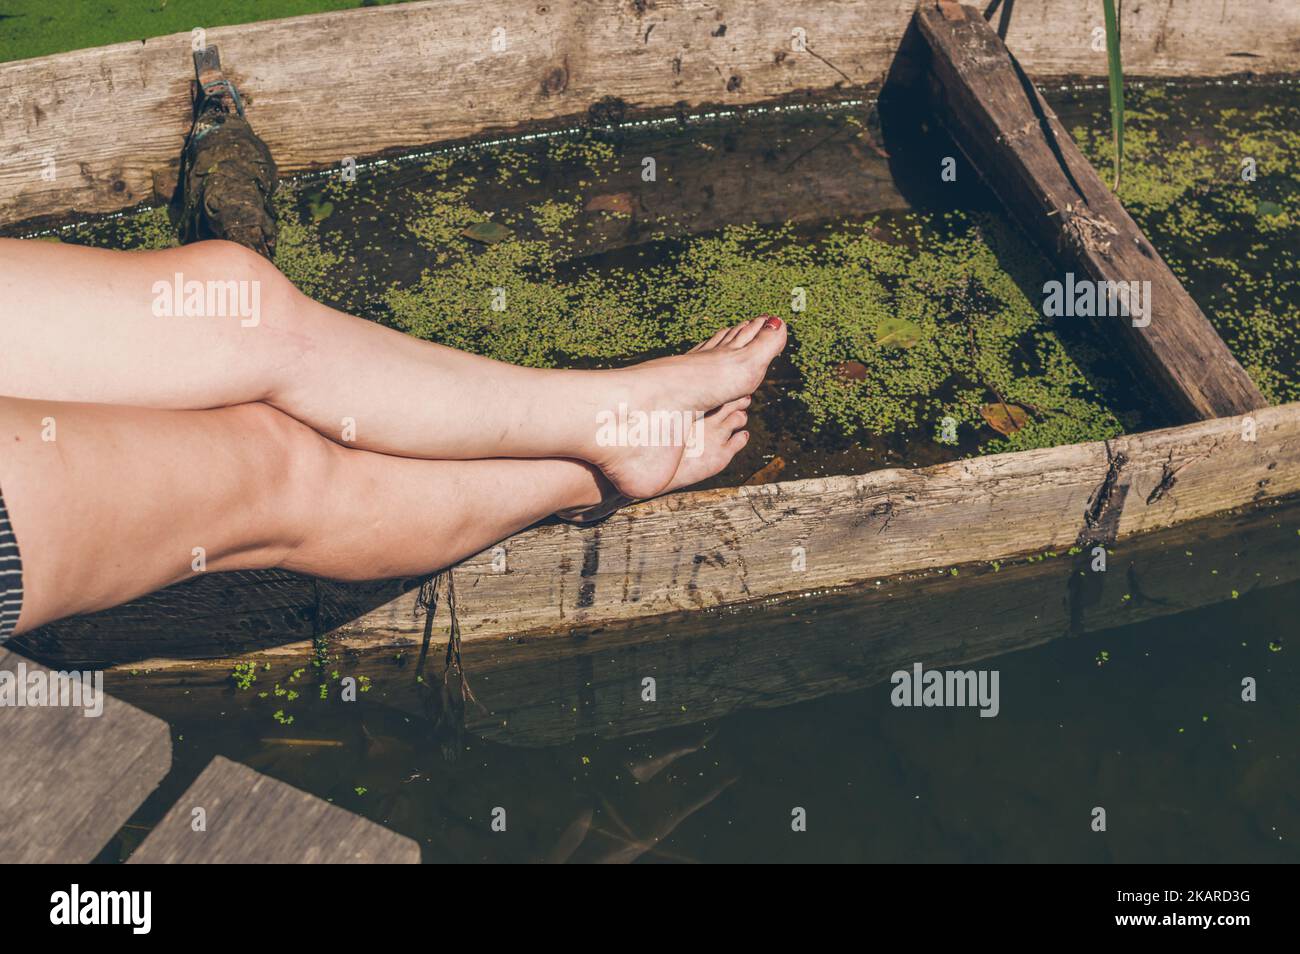 Elongated female legs lean on old submerged boat Stock Photo